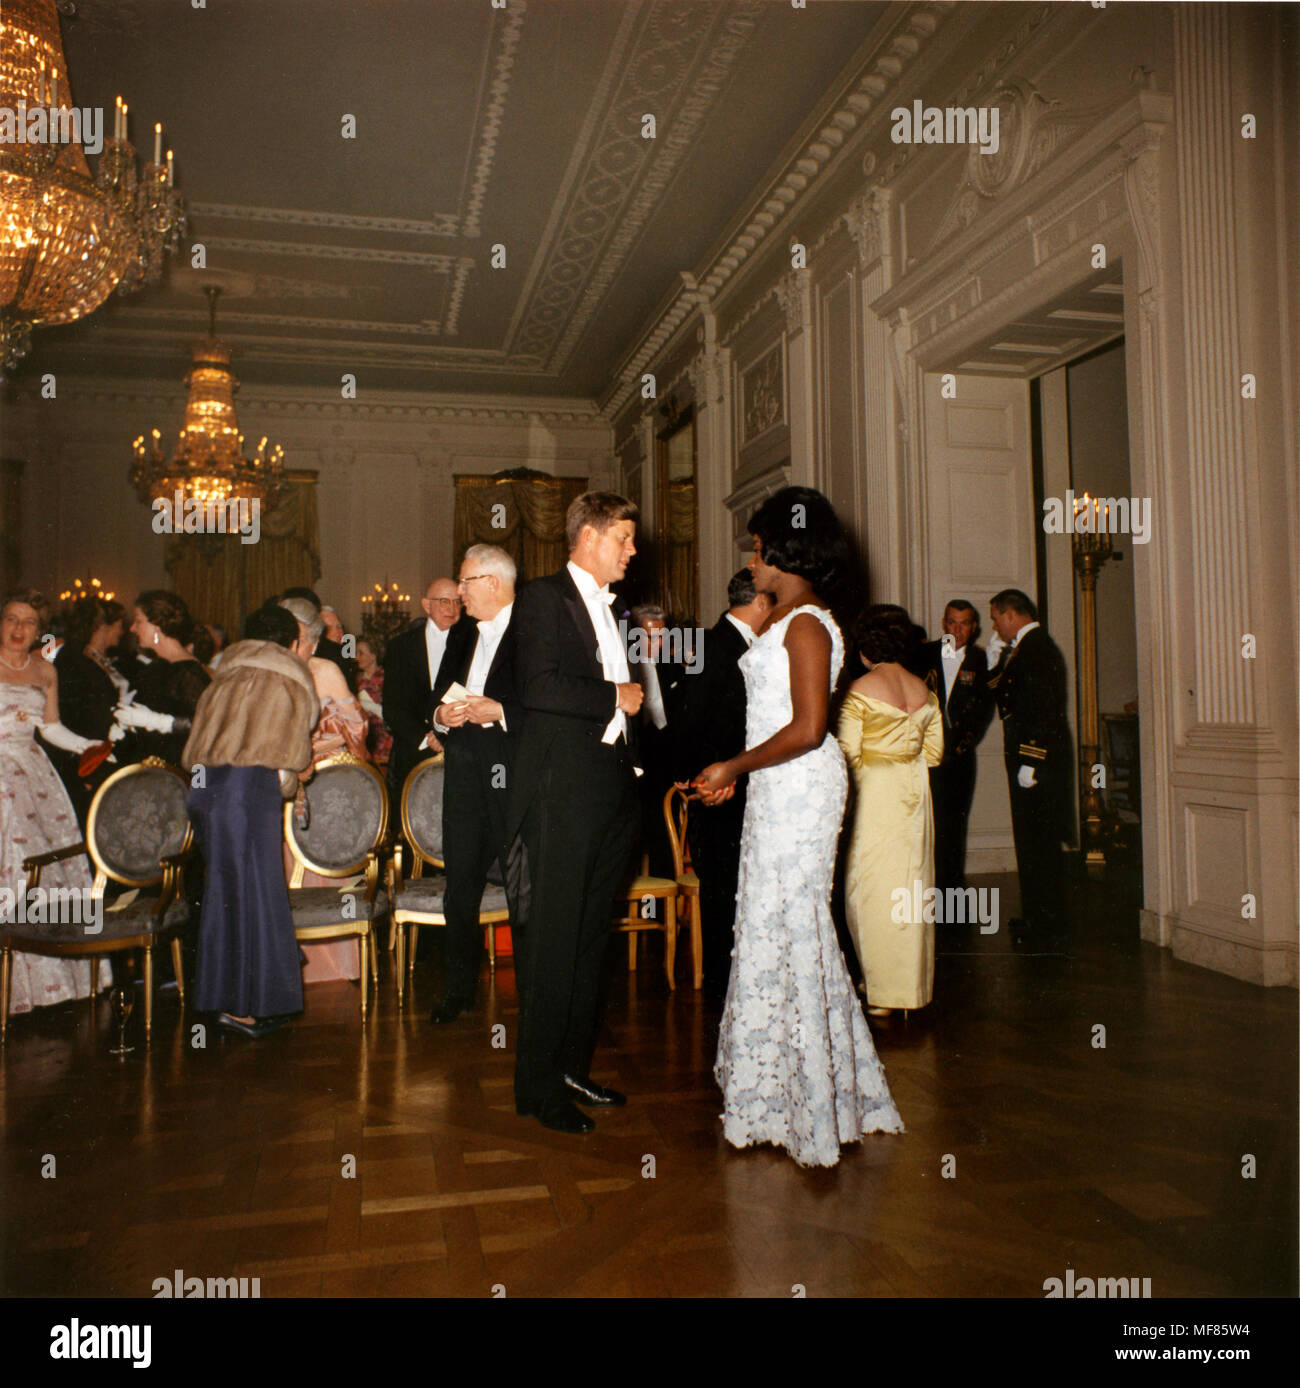 KN-C20222   20 Feb 1962 President Kennedy speaks with Grace Bumbry at the Dinner in Honor of the Vice President, Speaker of the House, and Chief Justice in the East Room, 20 February 1962.  Chief Justice Earl Warren and Secretary of Labor Arthur Goldberg are among the guests.  Photograph by Robert Knudsen in the John F. Kennedy Presidential Library and Museum, Boston. Stock Photo